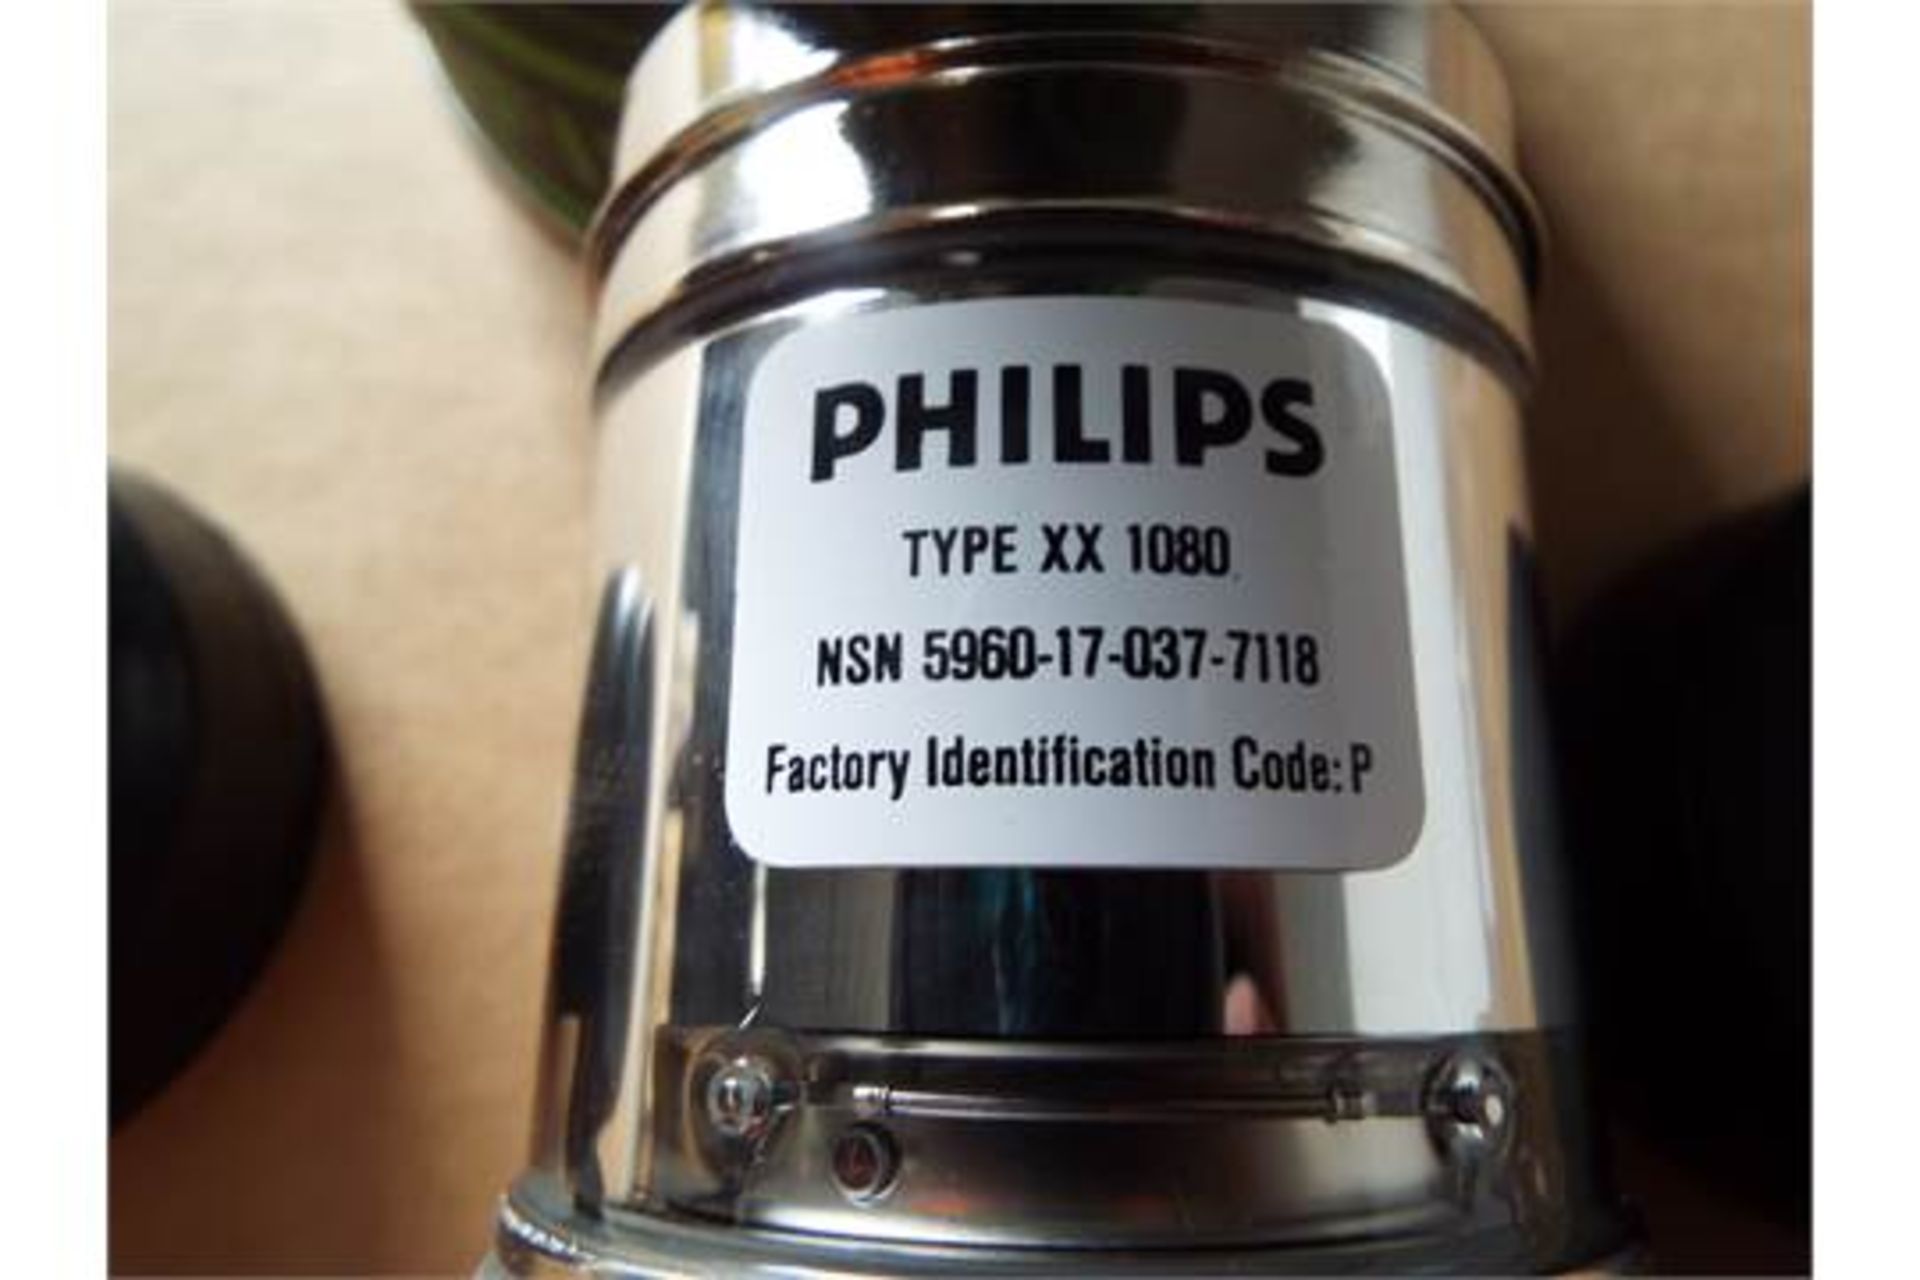 5 x Philips Type XX 1080 Image Intensifier / Night Vision Tubes - Image 5 of 6